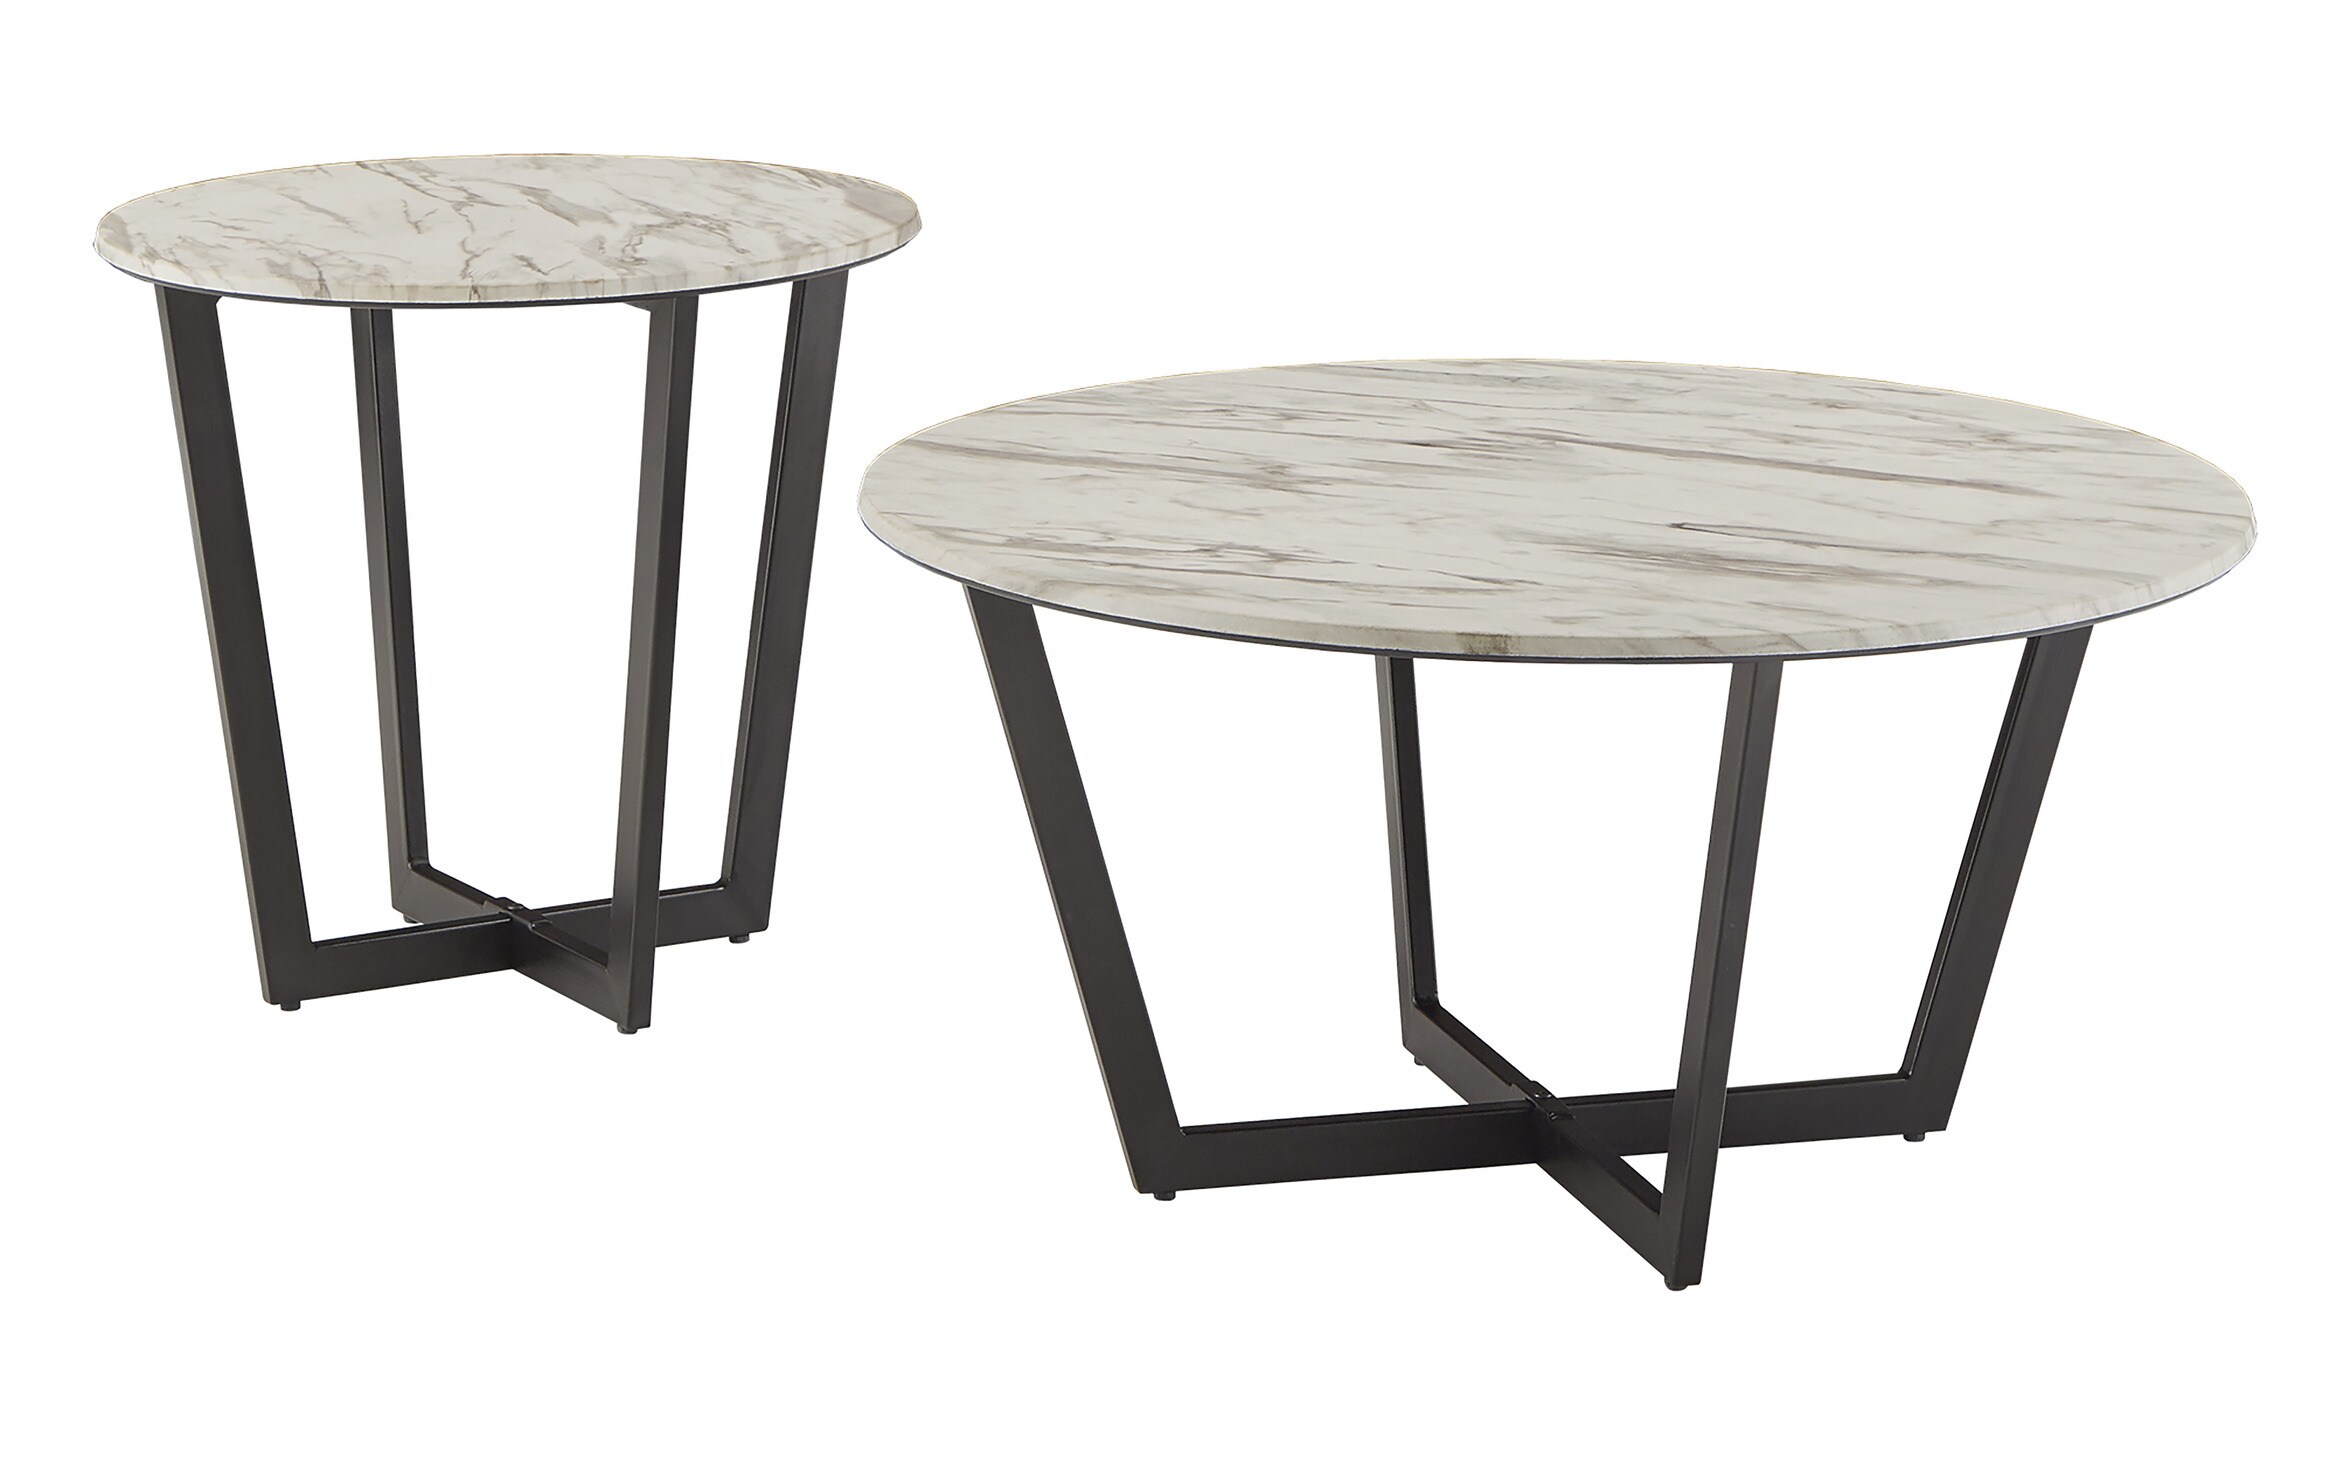 Marble Coffee Table Set : Fairhope 3 Pc Faux Marble Metal Coffee Table Set By Homelegance : Picket house furnishings caleb coffee table with marble top.